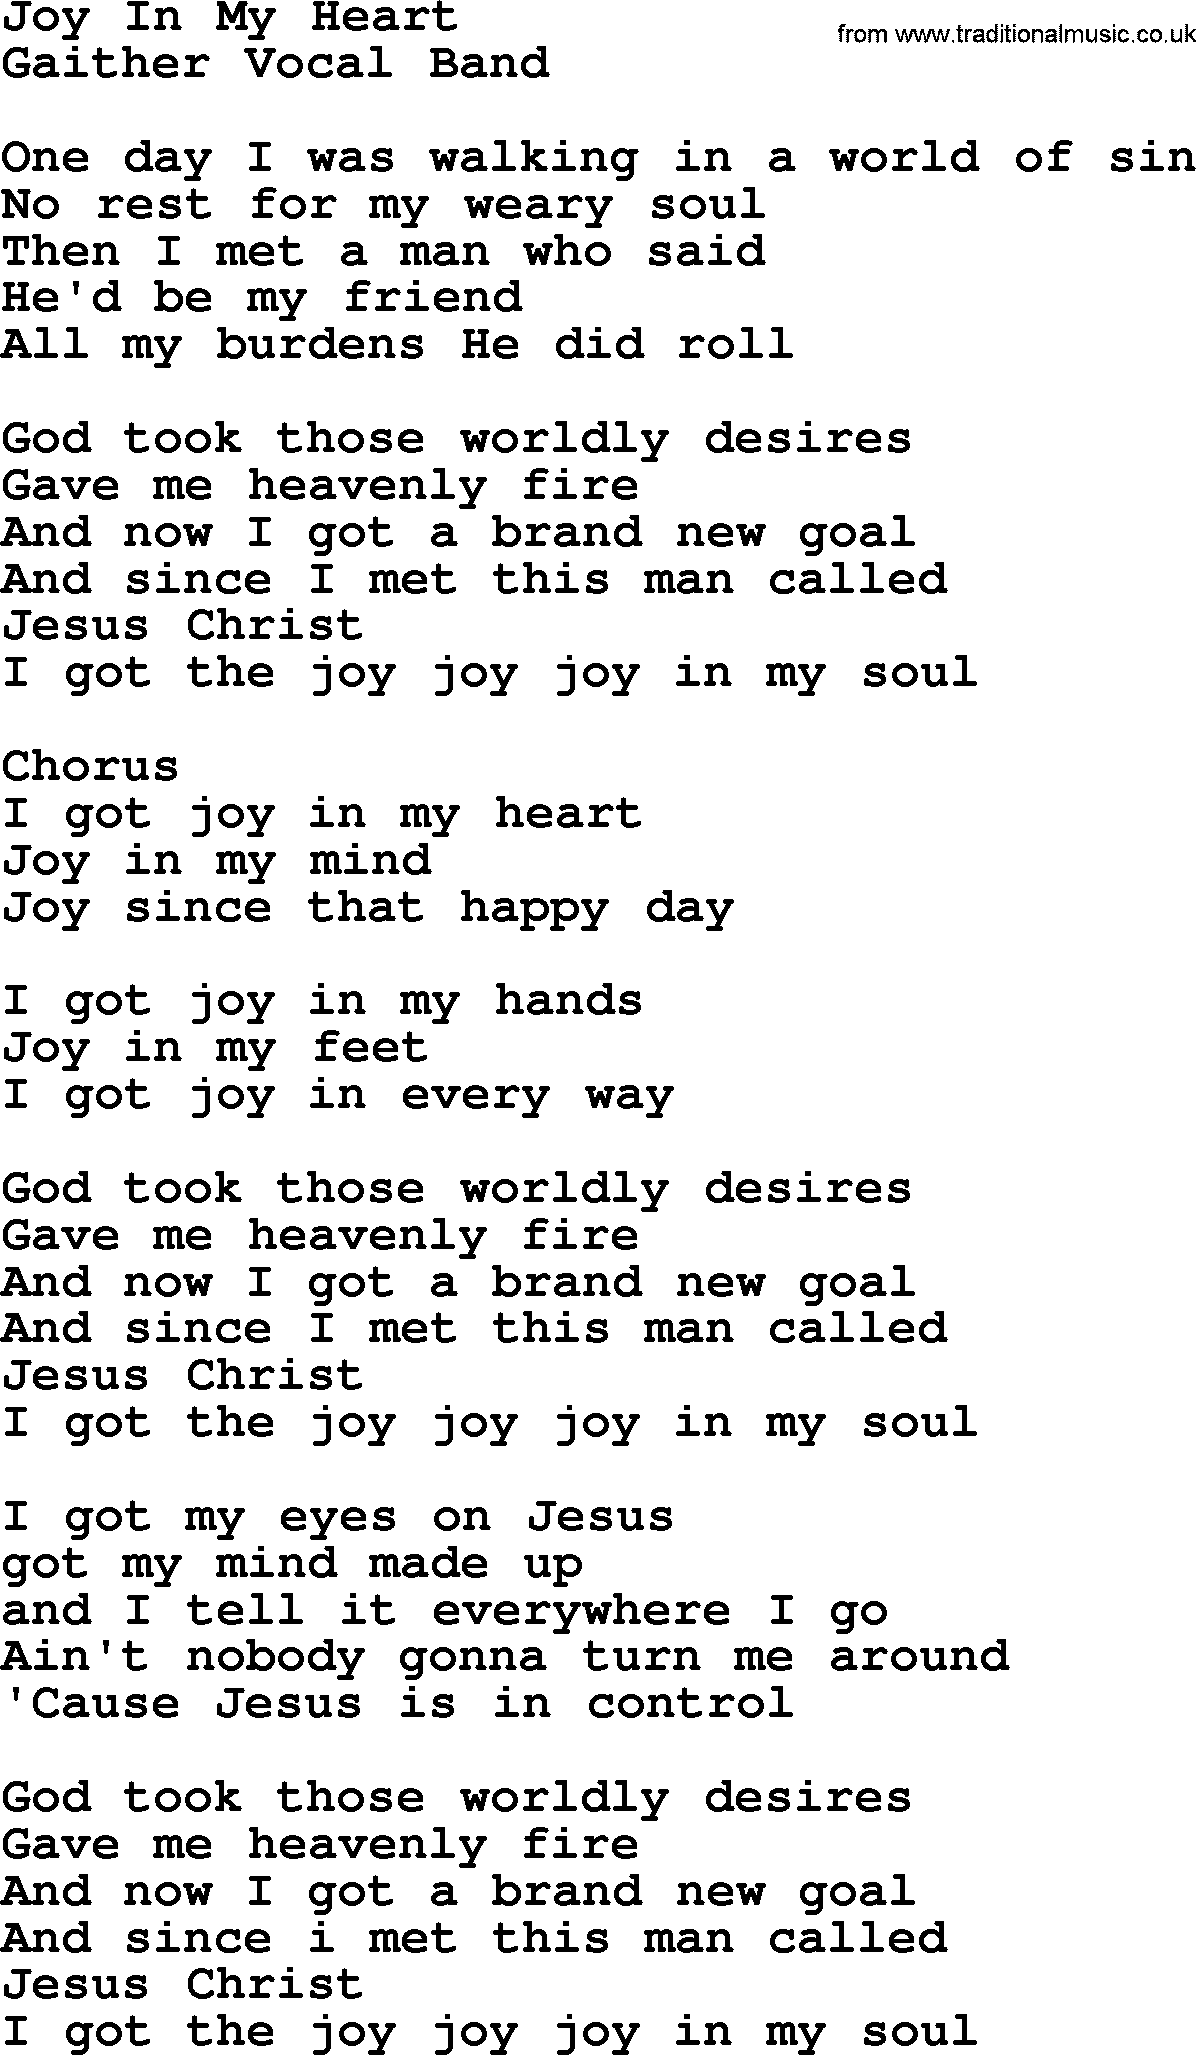 A collection of 500+ most sung Christian church hymns and songs, title: Joy In My Heart~, lyrics, PPTX and PDF